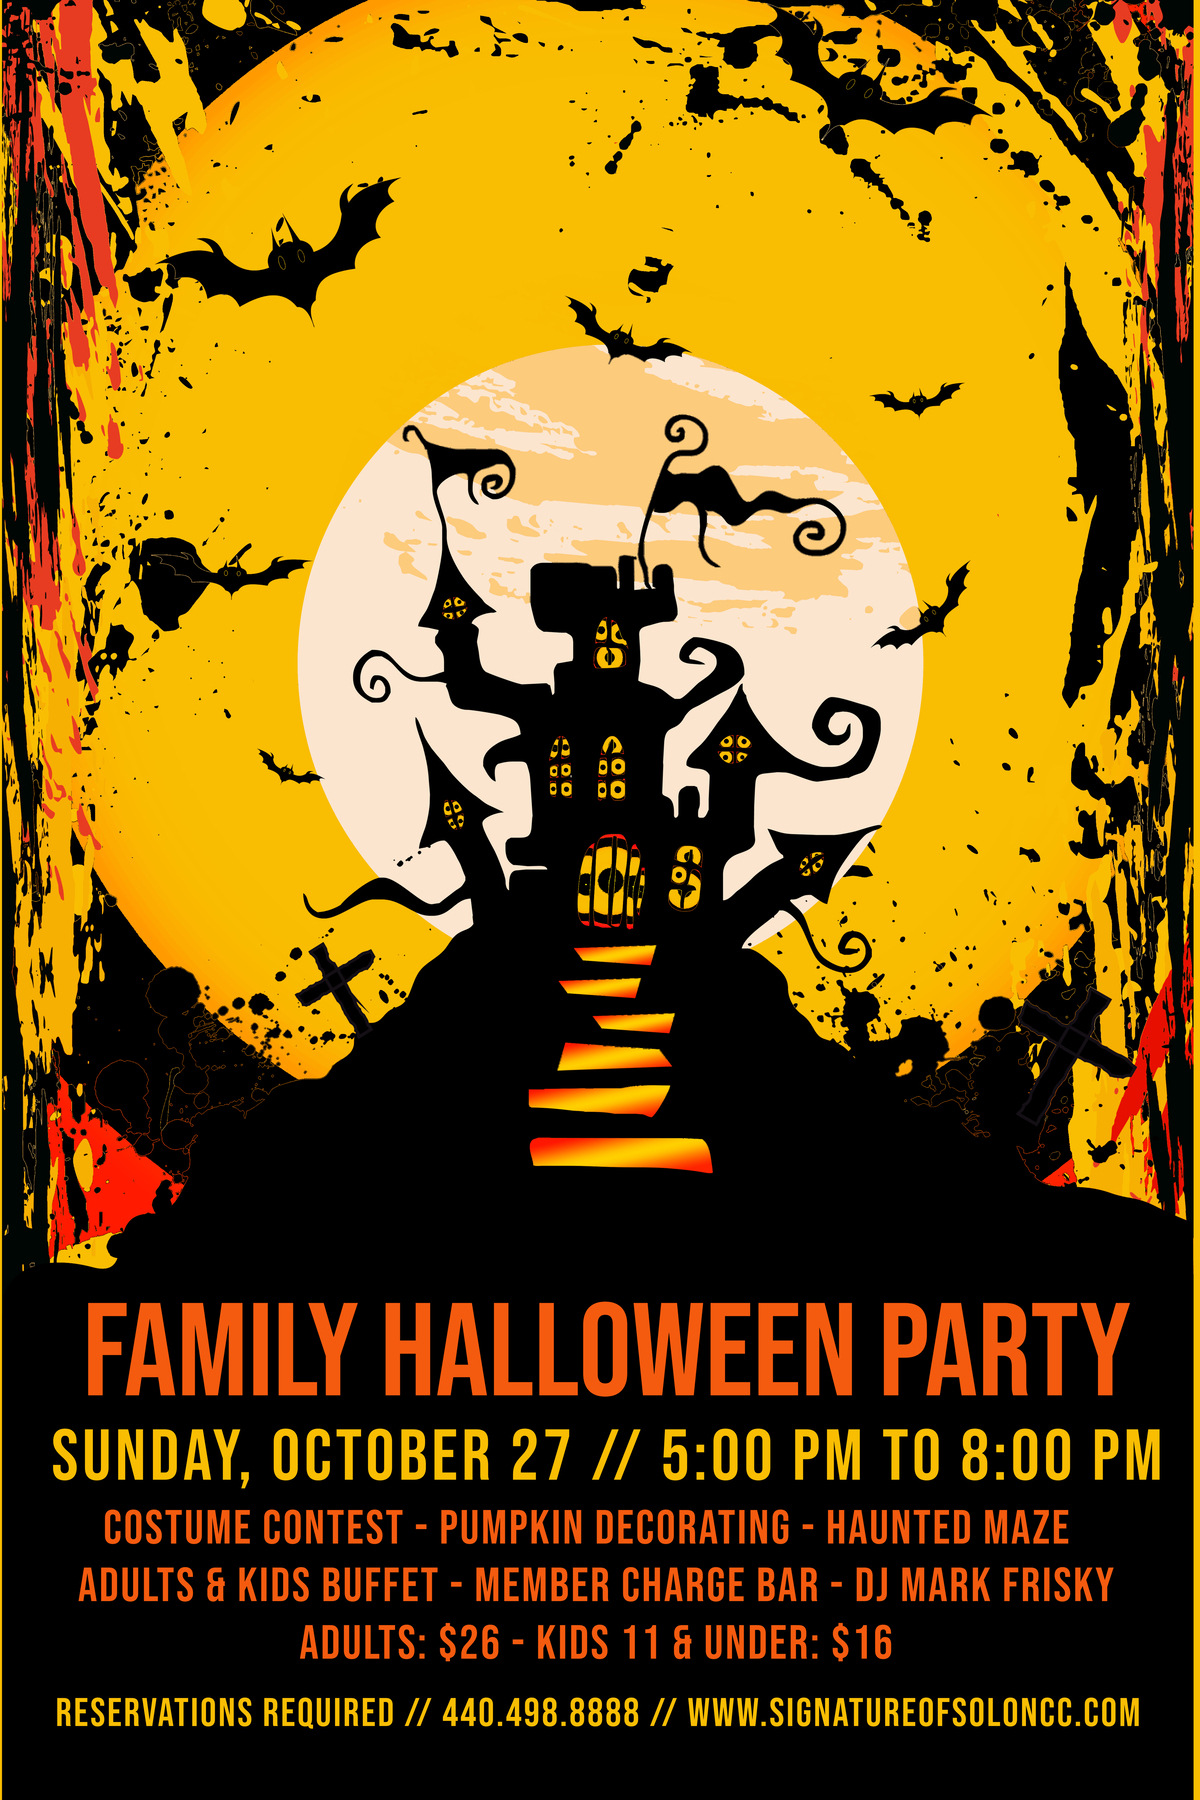 Family Halloween Party | Signature of Solon | Sunday, October 27, 2019